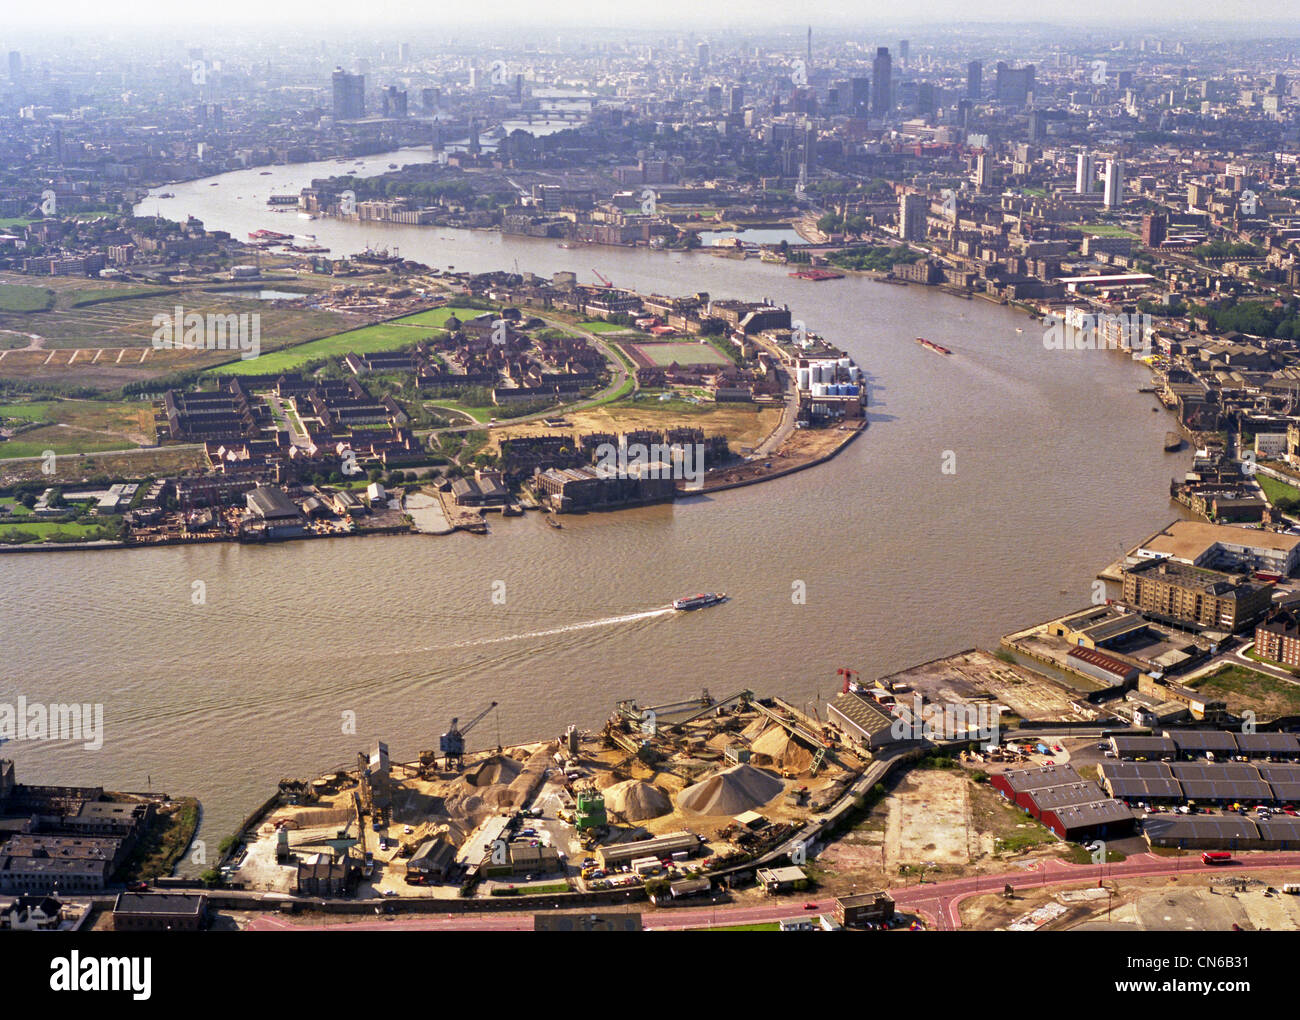 rare historic aerial view of the London Skyline from Canary Wharf taken in September 1984 Stock Photo